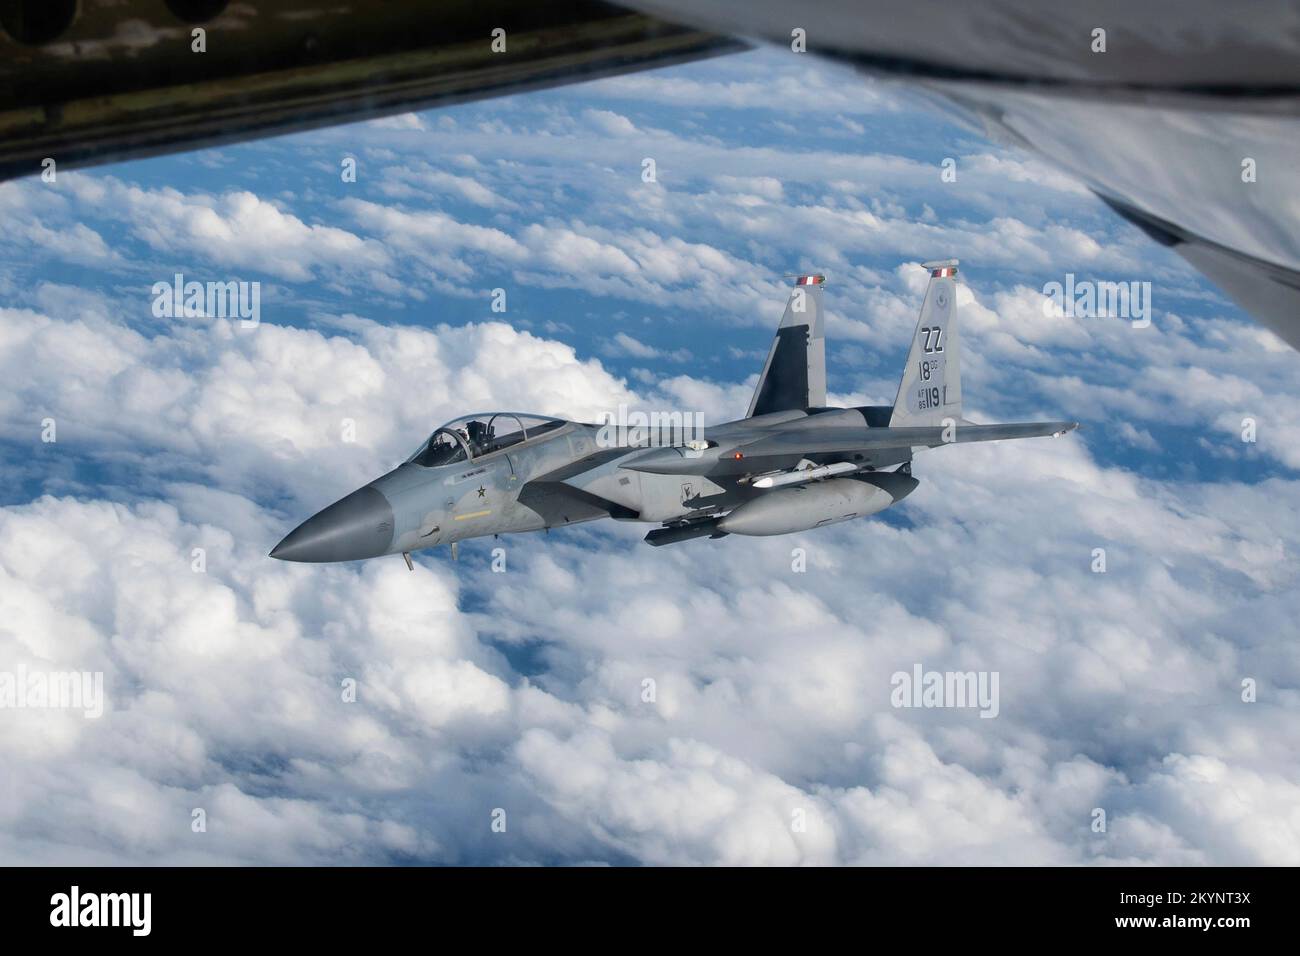 Pacific Ocean, International Waters. 30th Nov, 2022. Pacific Ocean, International Waters. 30 November, 2022. A U.S. Air Force F-15C Eagle fighter jet, assigned to the 18th Fighter Wing, pulls off after refueling from a KC-135 Stratotanker aircraft during patrol mission, November 30, 2022 over the Pacific Ocean. Credit: A1C Tylir Meyer/U.S. Air Force/Alamy Live News Stock Photo